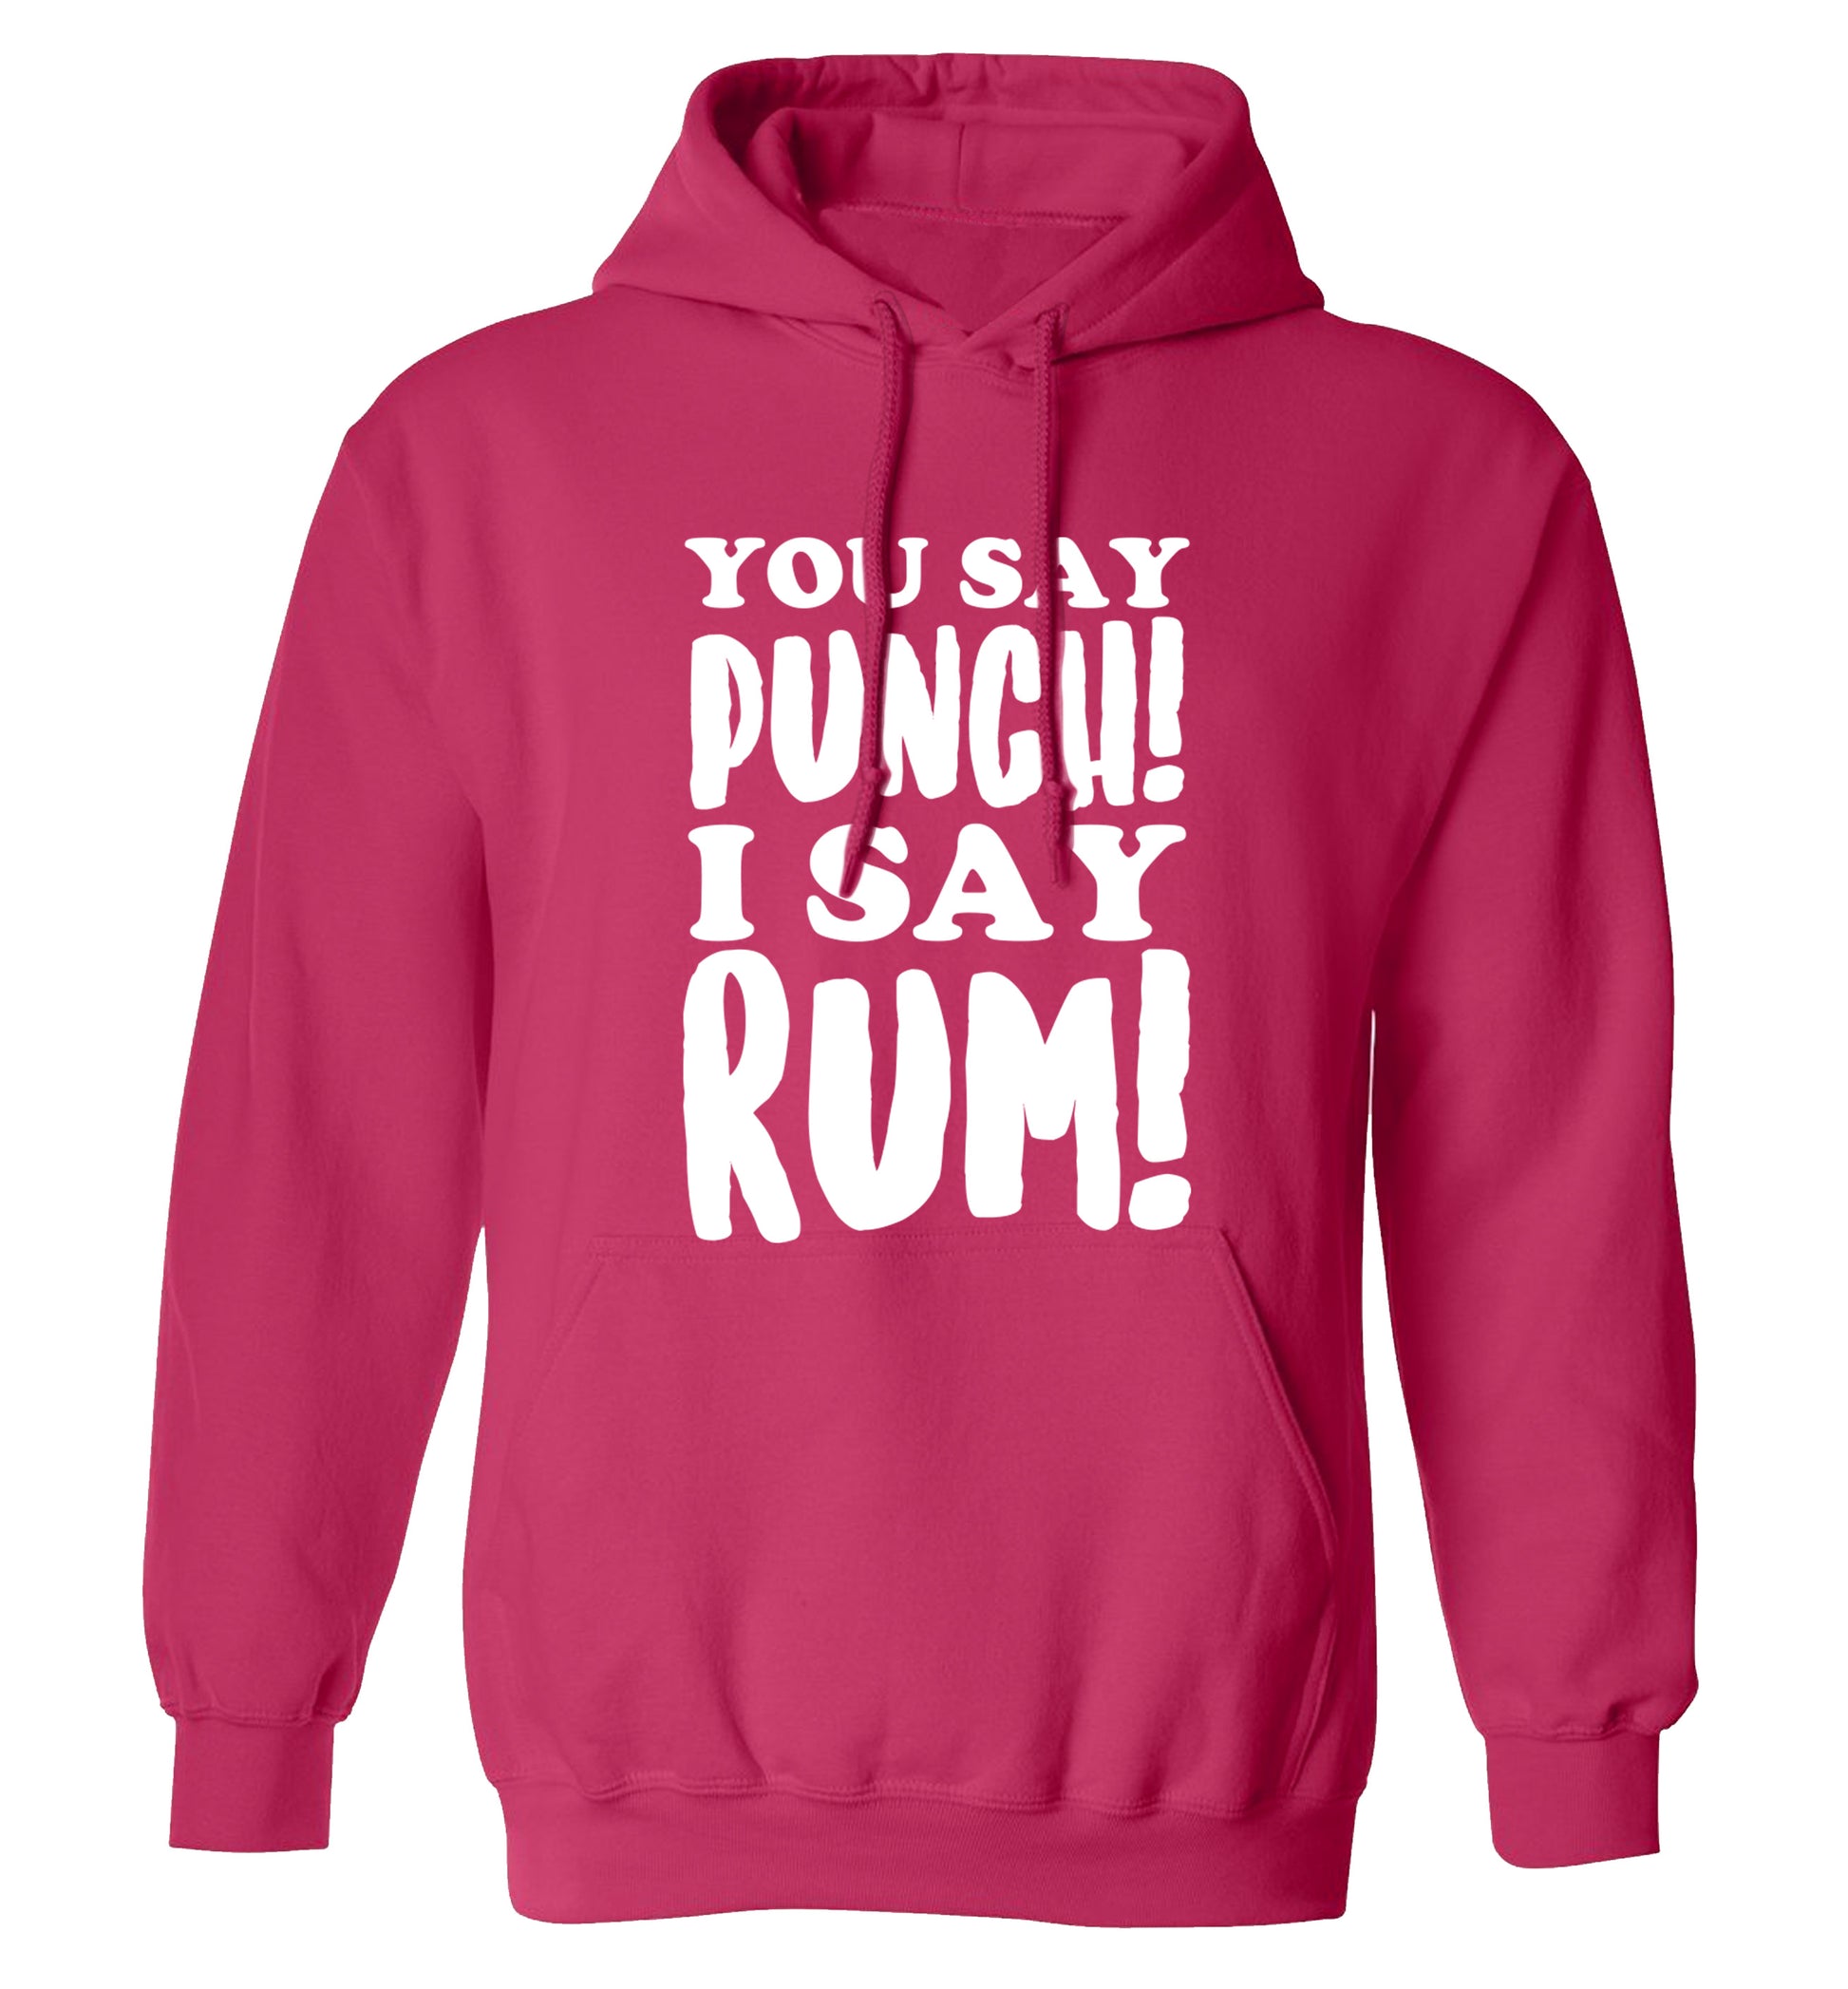 You say punch I say rum! adults unisex pink hoodie 2XL